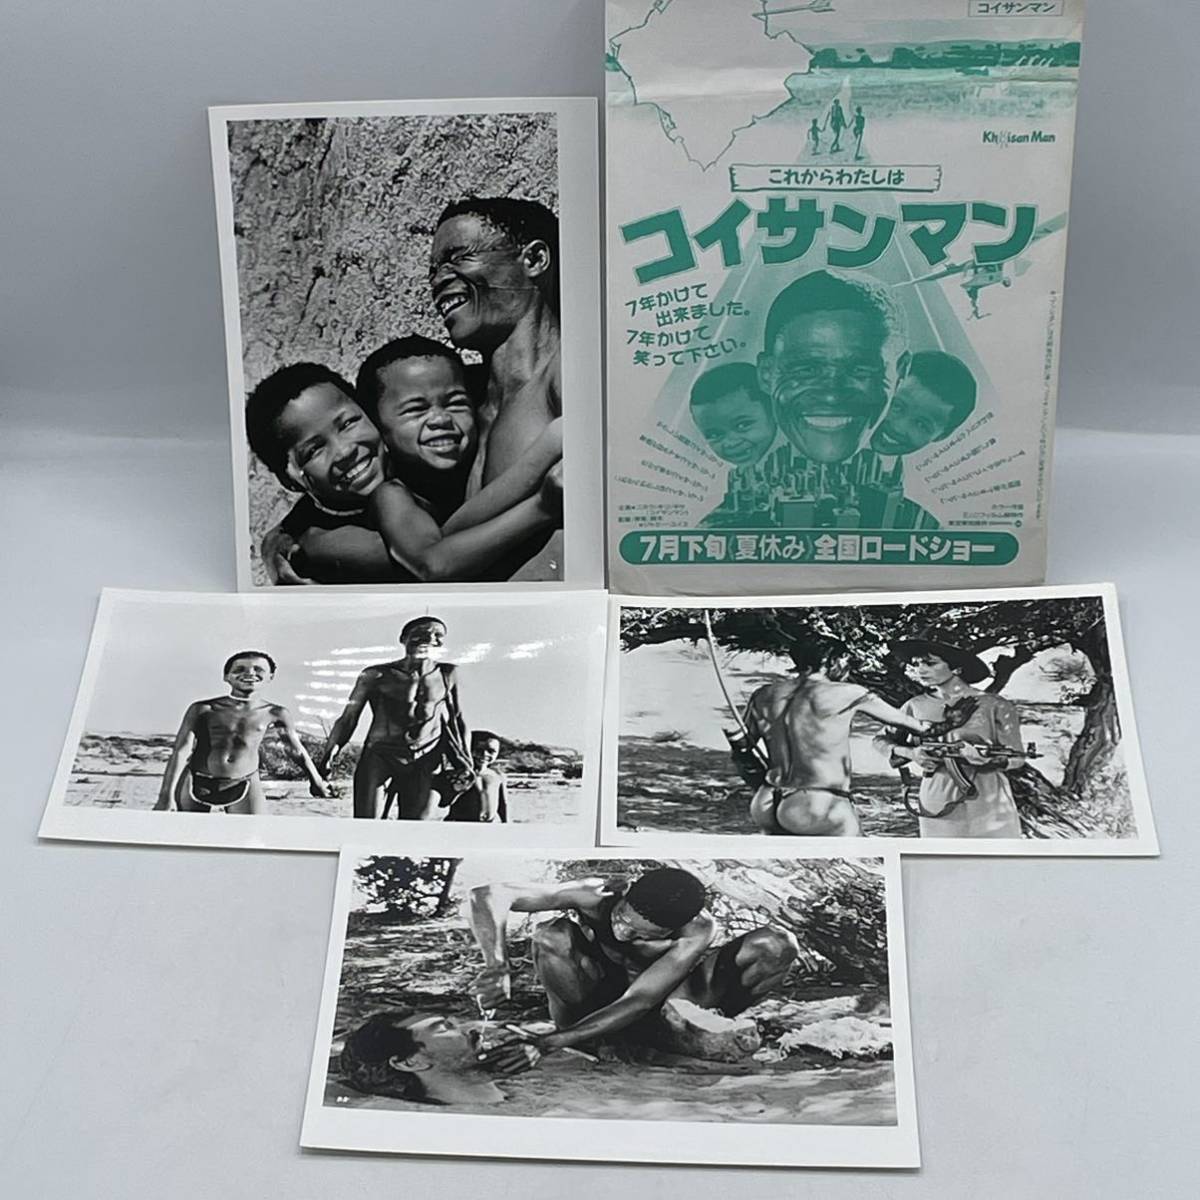 ★Super rare!!★ Movie Koi San Man ★ Good quality still photo set/photo/no color/Showa retro/original/not for sale/rare envelope included, hard to find, movie, video, Movie related goods, photograph